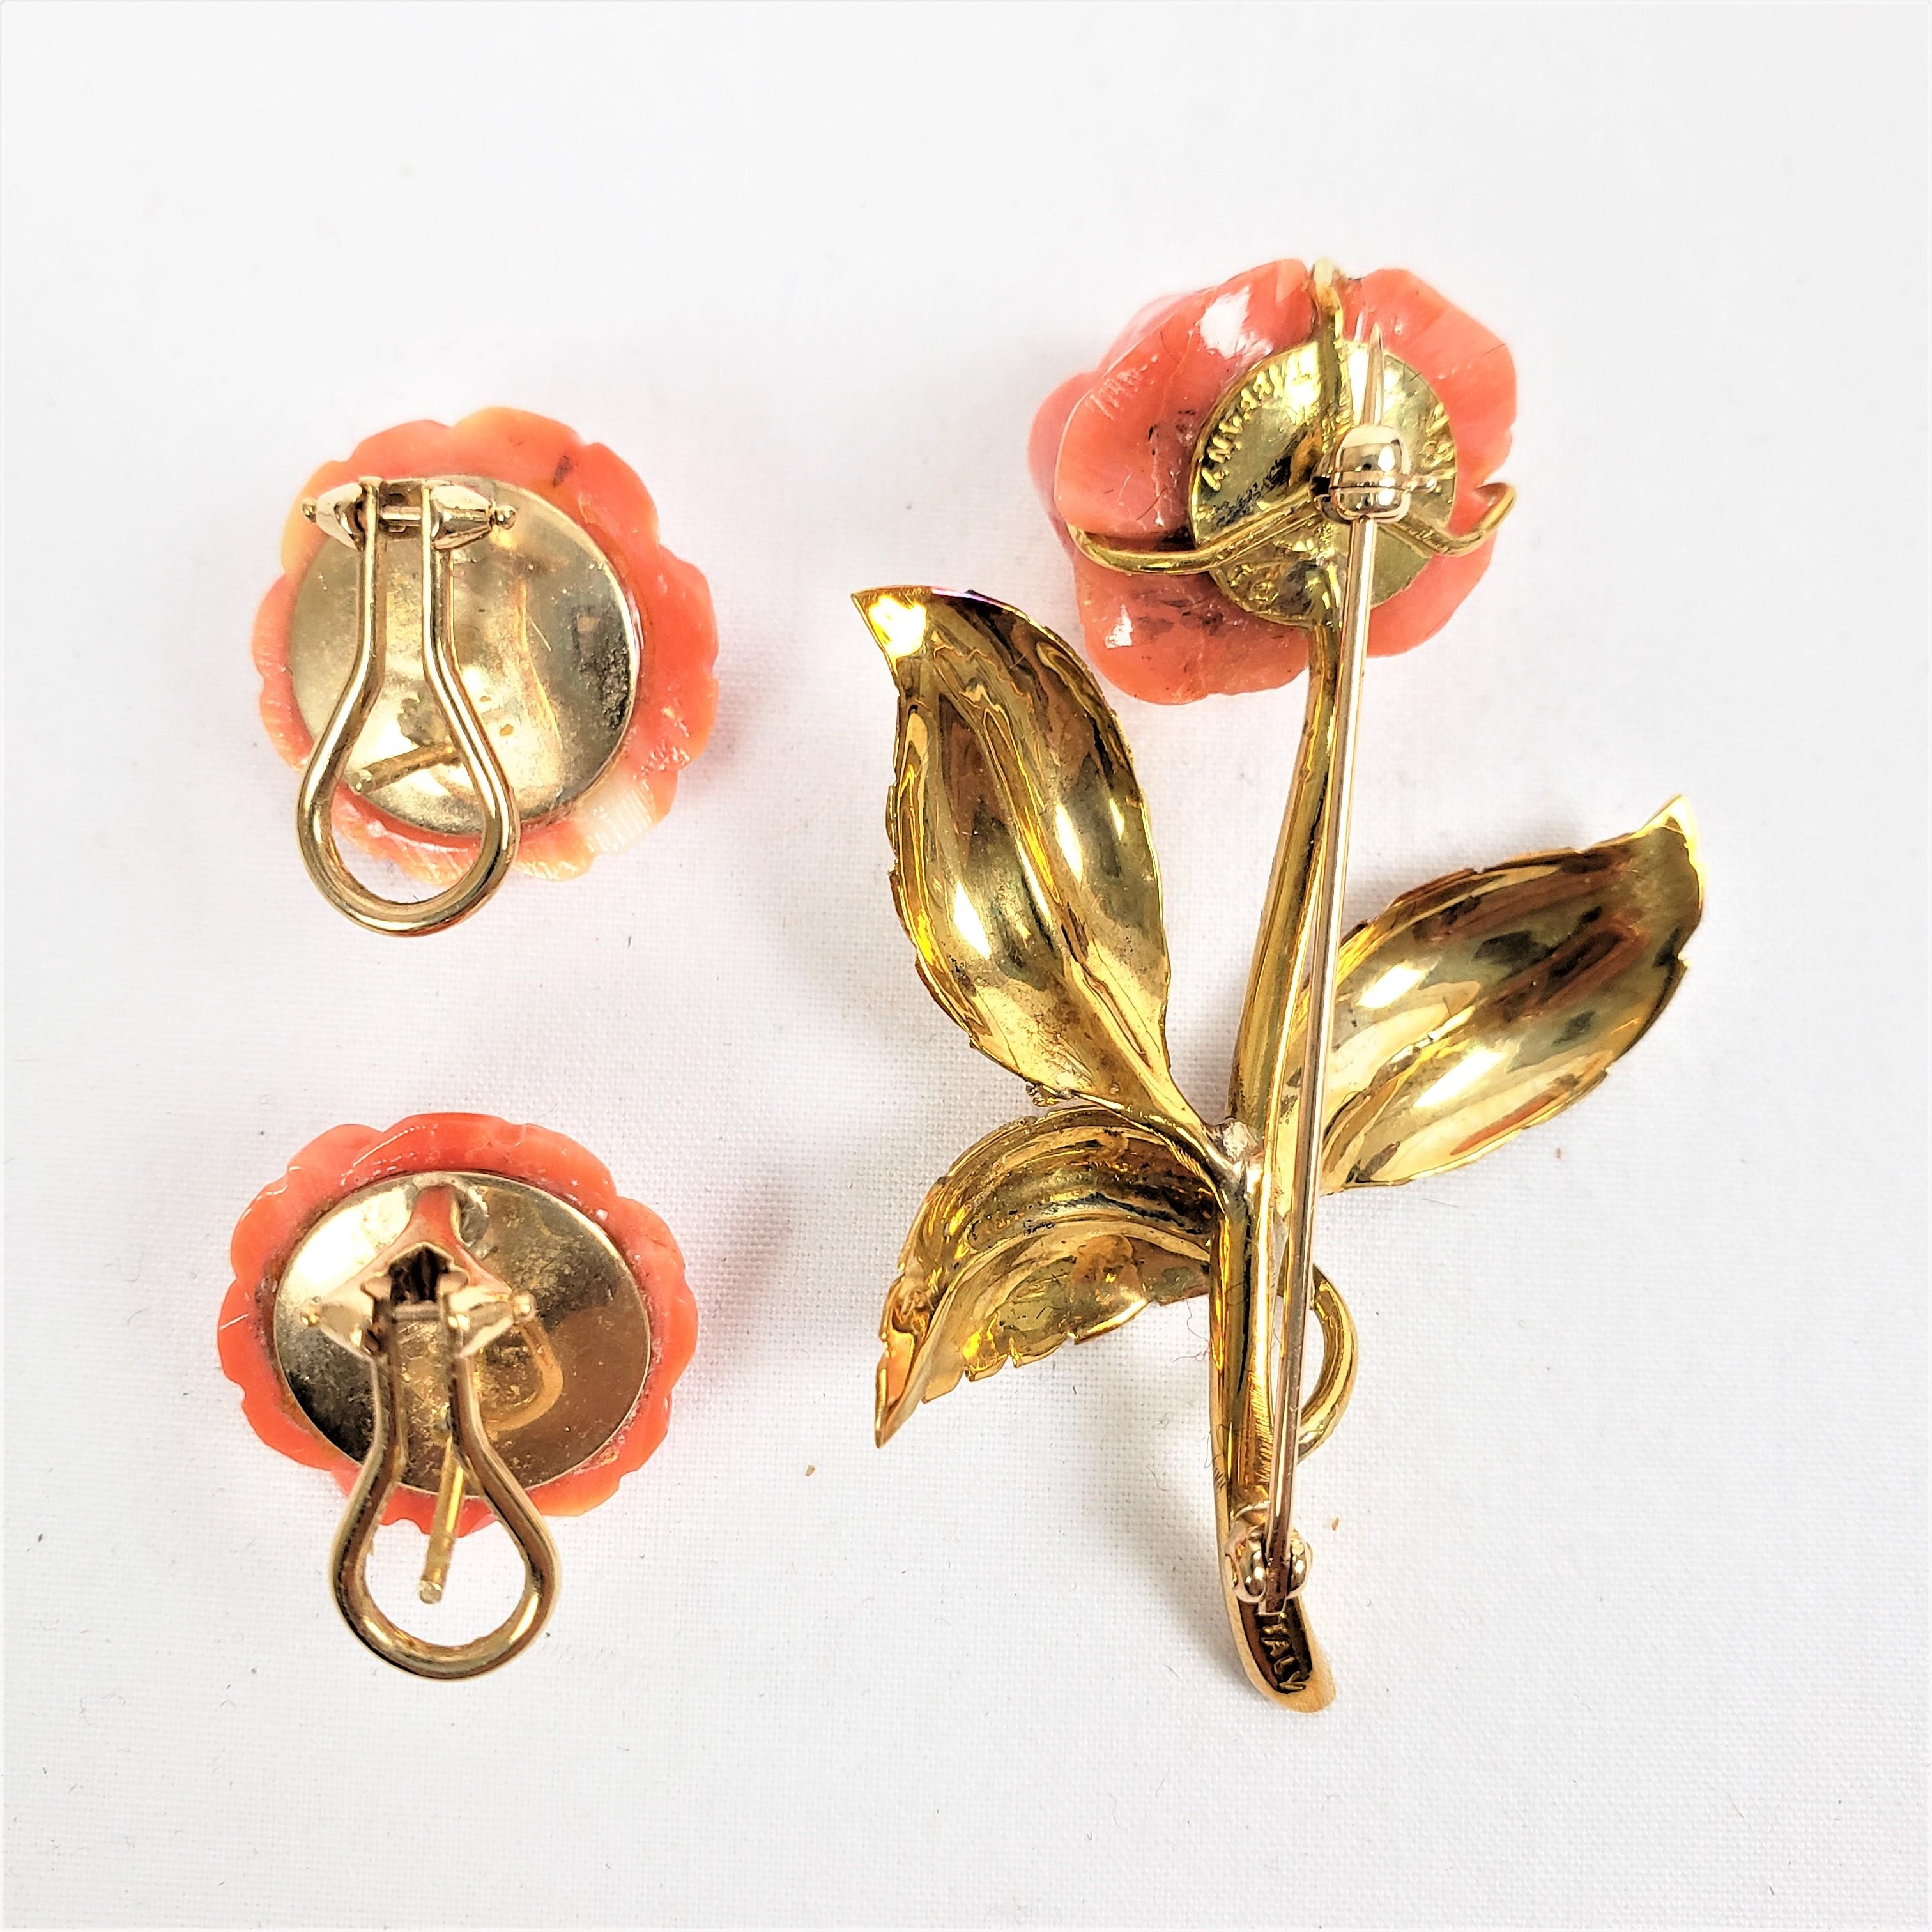 Tiffany 18 Karat Gold & Carved Coral Brooch with Matching 14 Karat Earrings Set For Sale 3